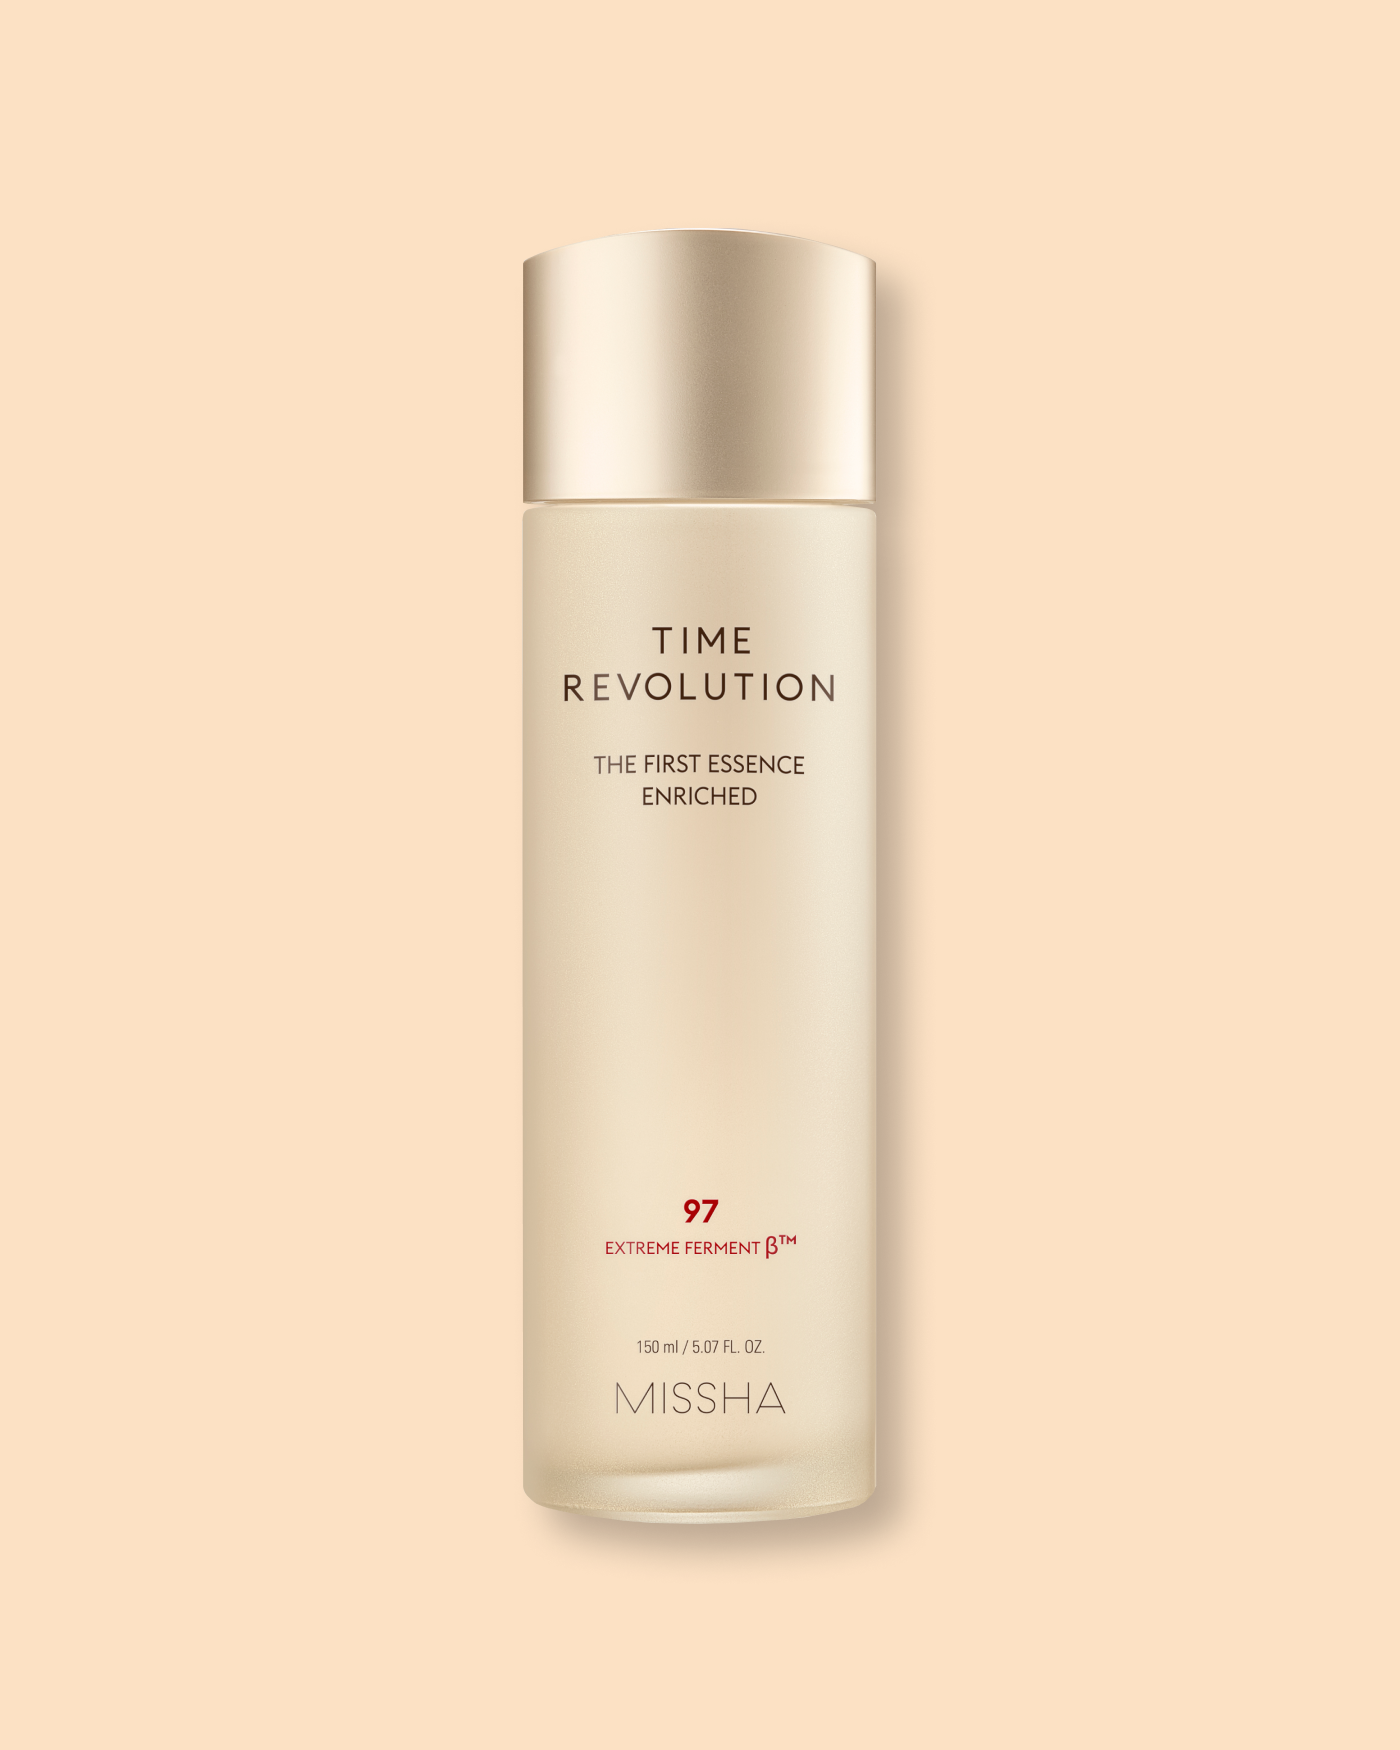 Soko-Glam-PDP-Missha-Time-Revolution-The-First-Essence-Enriched-01